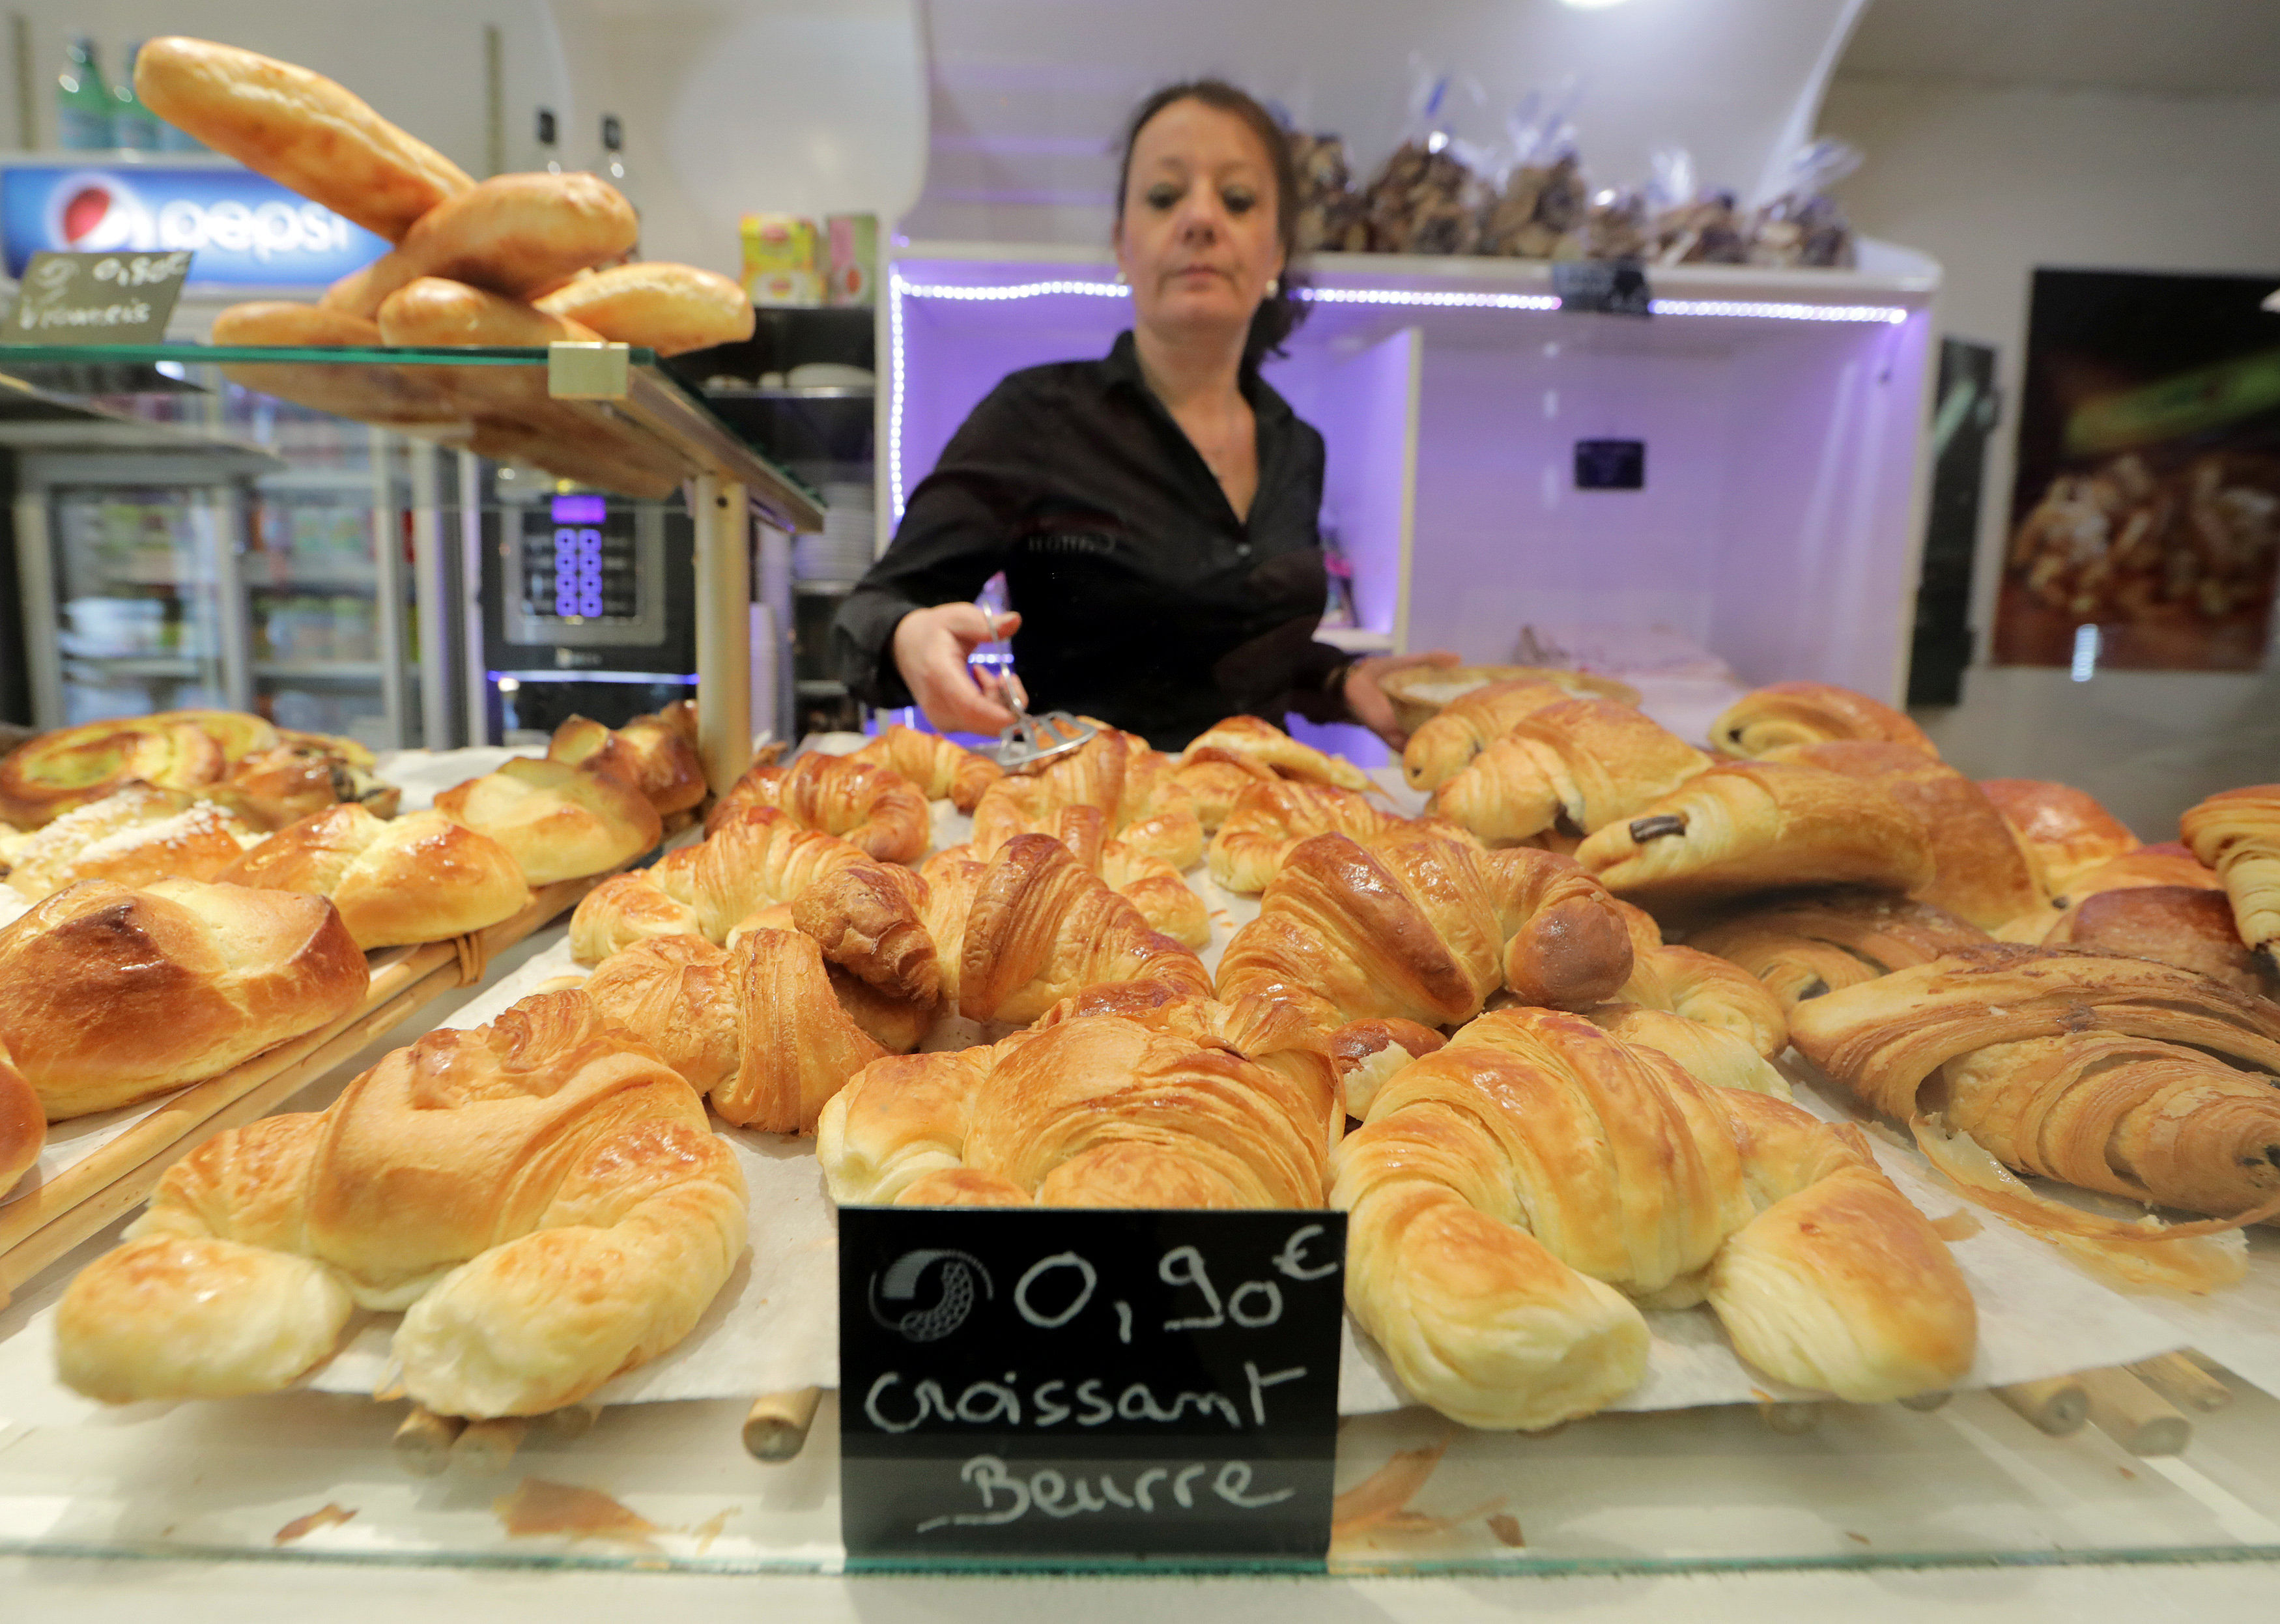 Butter croissants for sale at a bakery in France. Eat well and be a better person in 2018. PHOTO: REUTERS